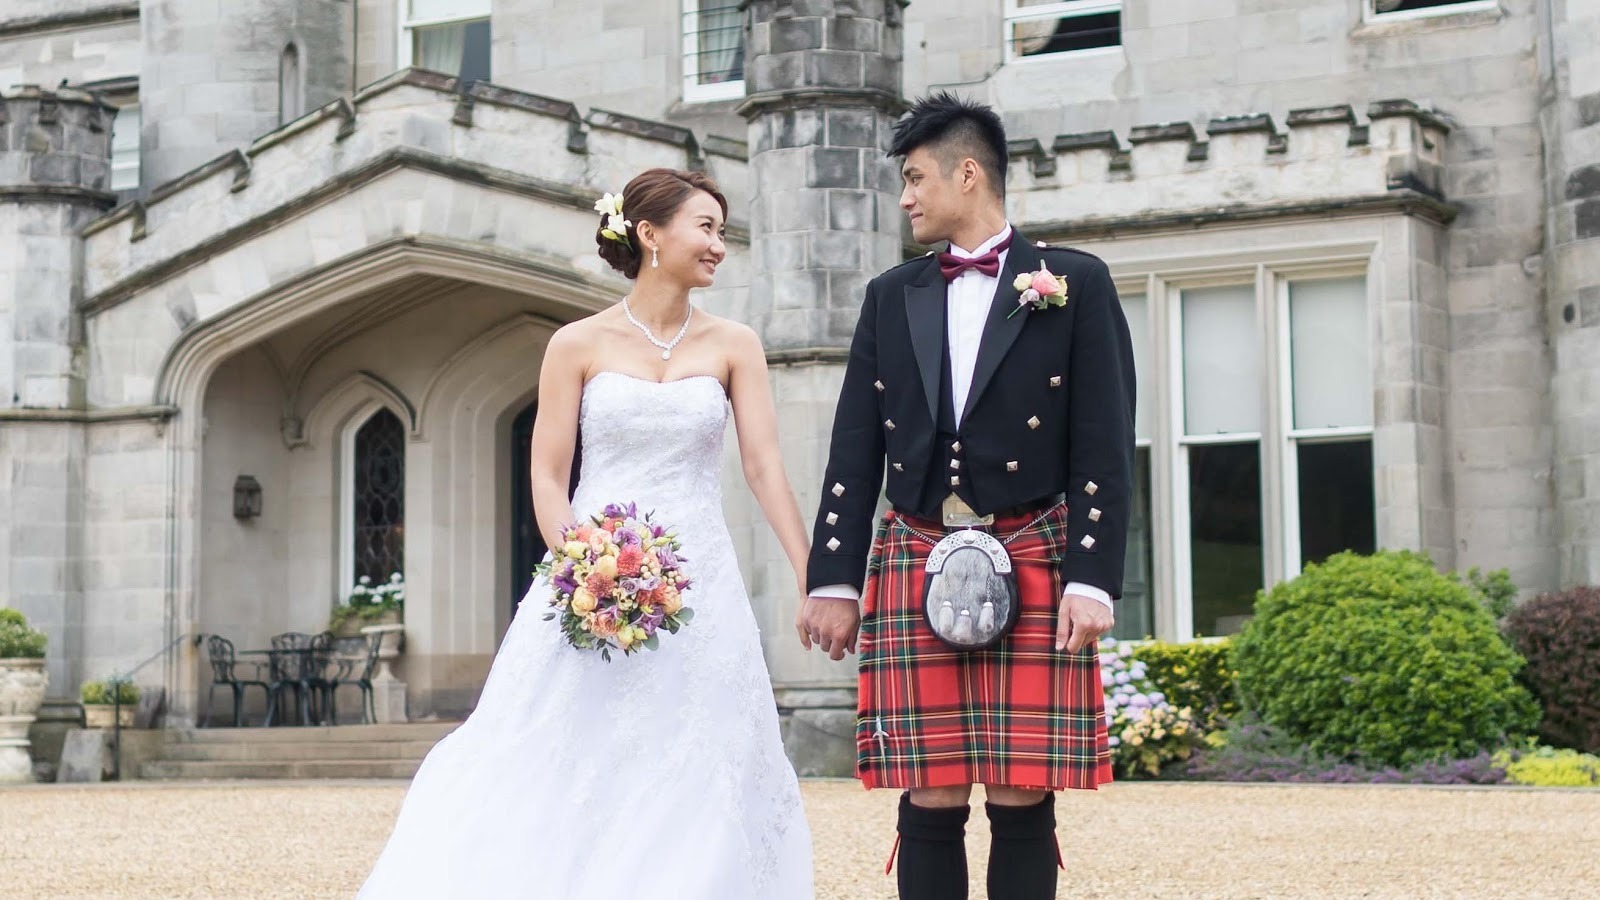 Scotland woos Chinese couples with whisky, kilts and castles | Scotland |  The Times